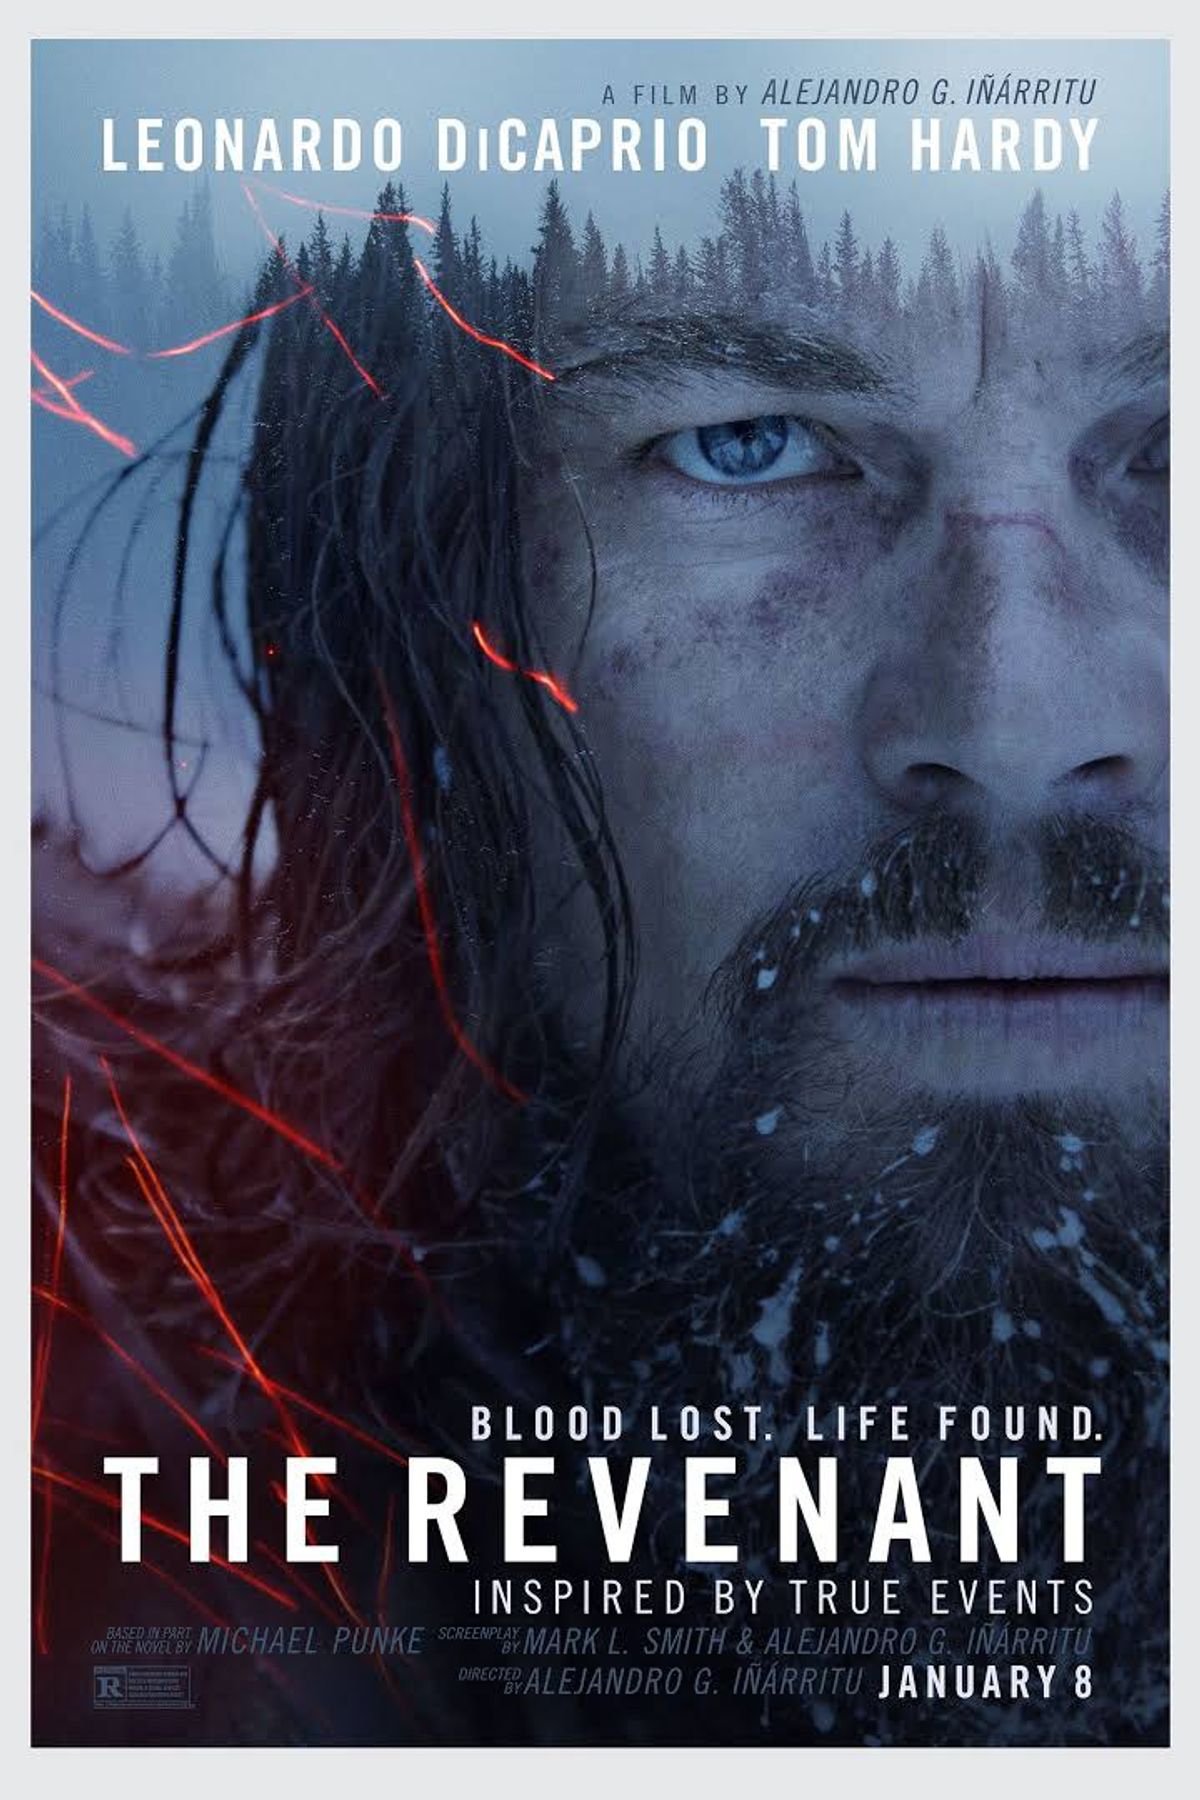 'The Revenant': More Than Just A Revenge Story